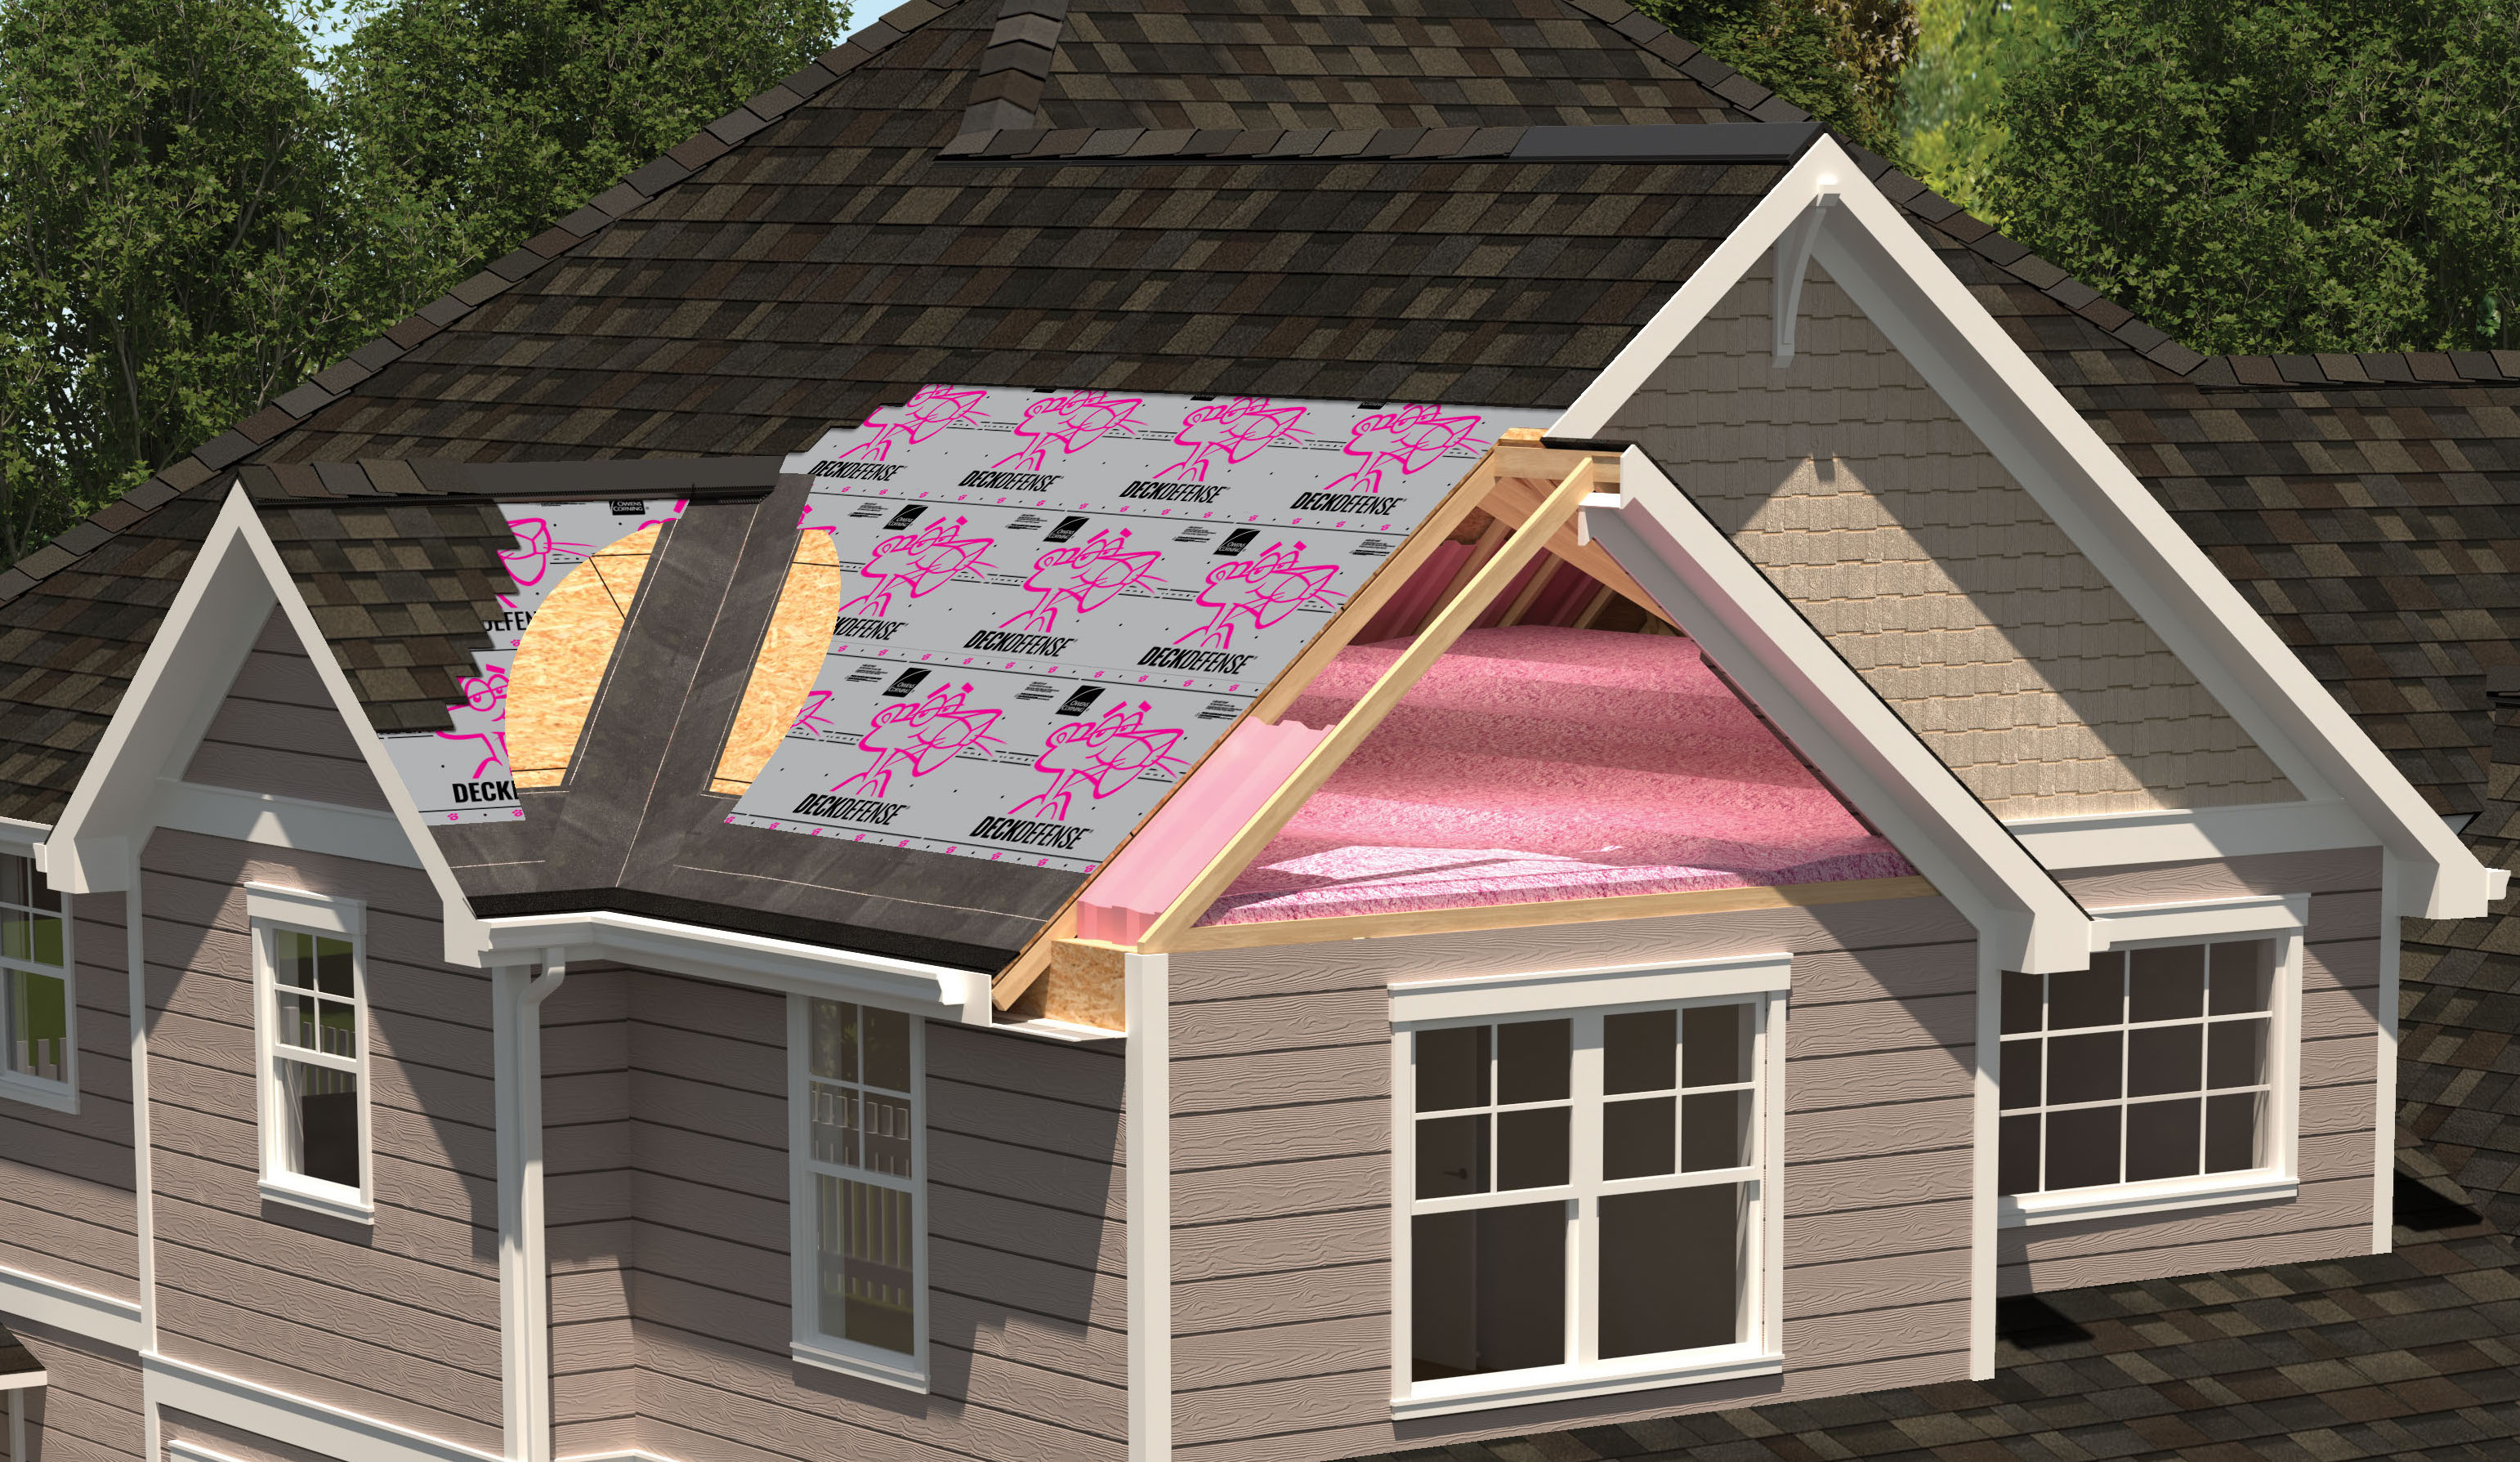 The Best Owens Corning Shingles Guide 2022 - Sol Vista Roofing